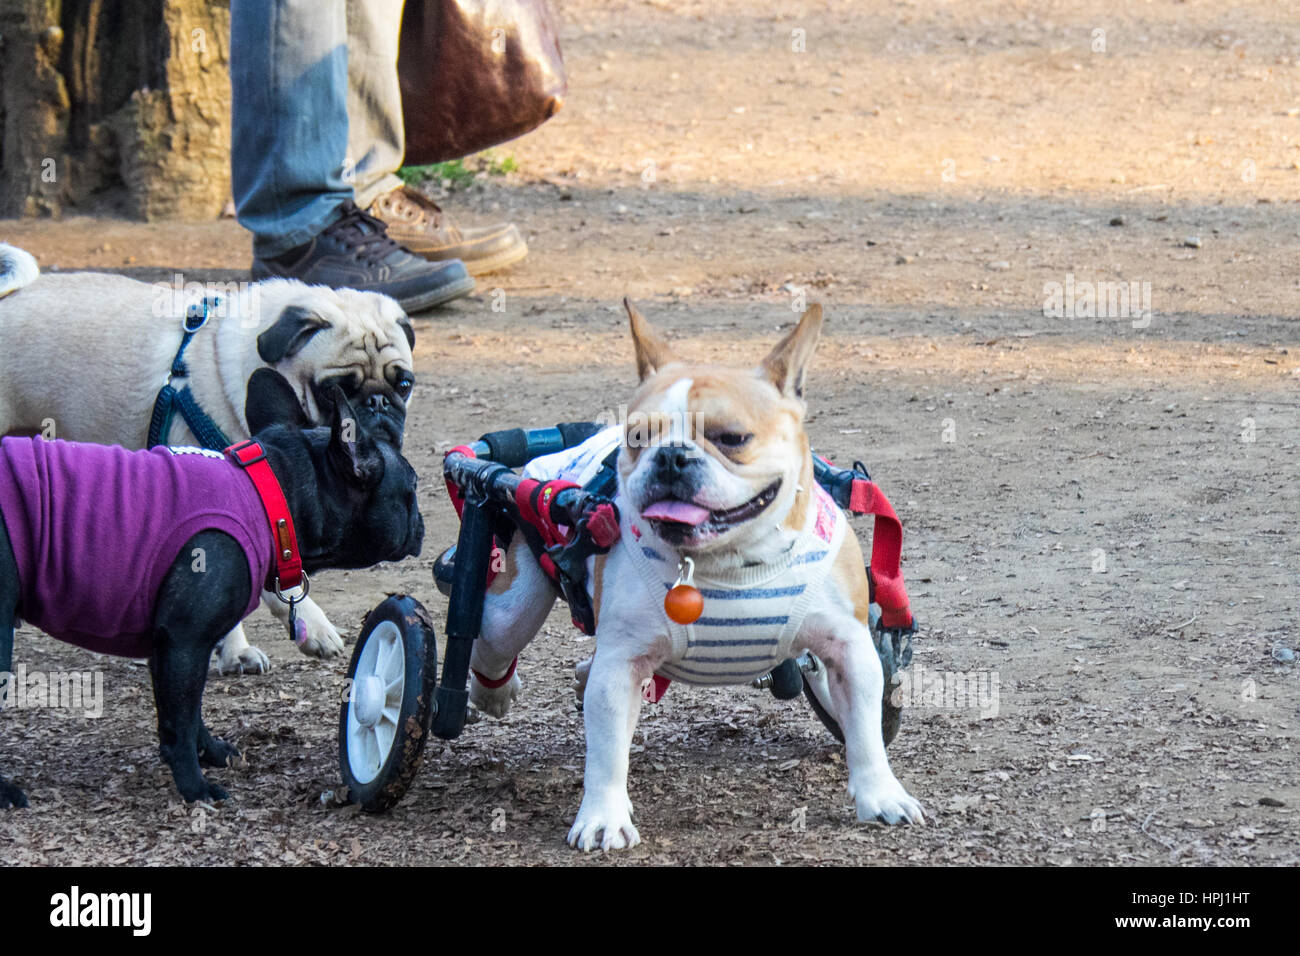 A dog which has lost the use of its hind legs in a canine wheelchair, in a dog park, Yoyogi Park, Shibuya, Tokyo. Stock Photo